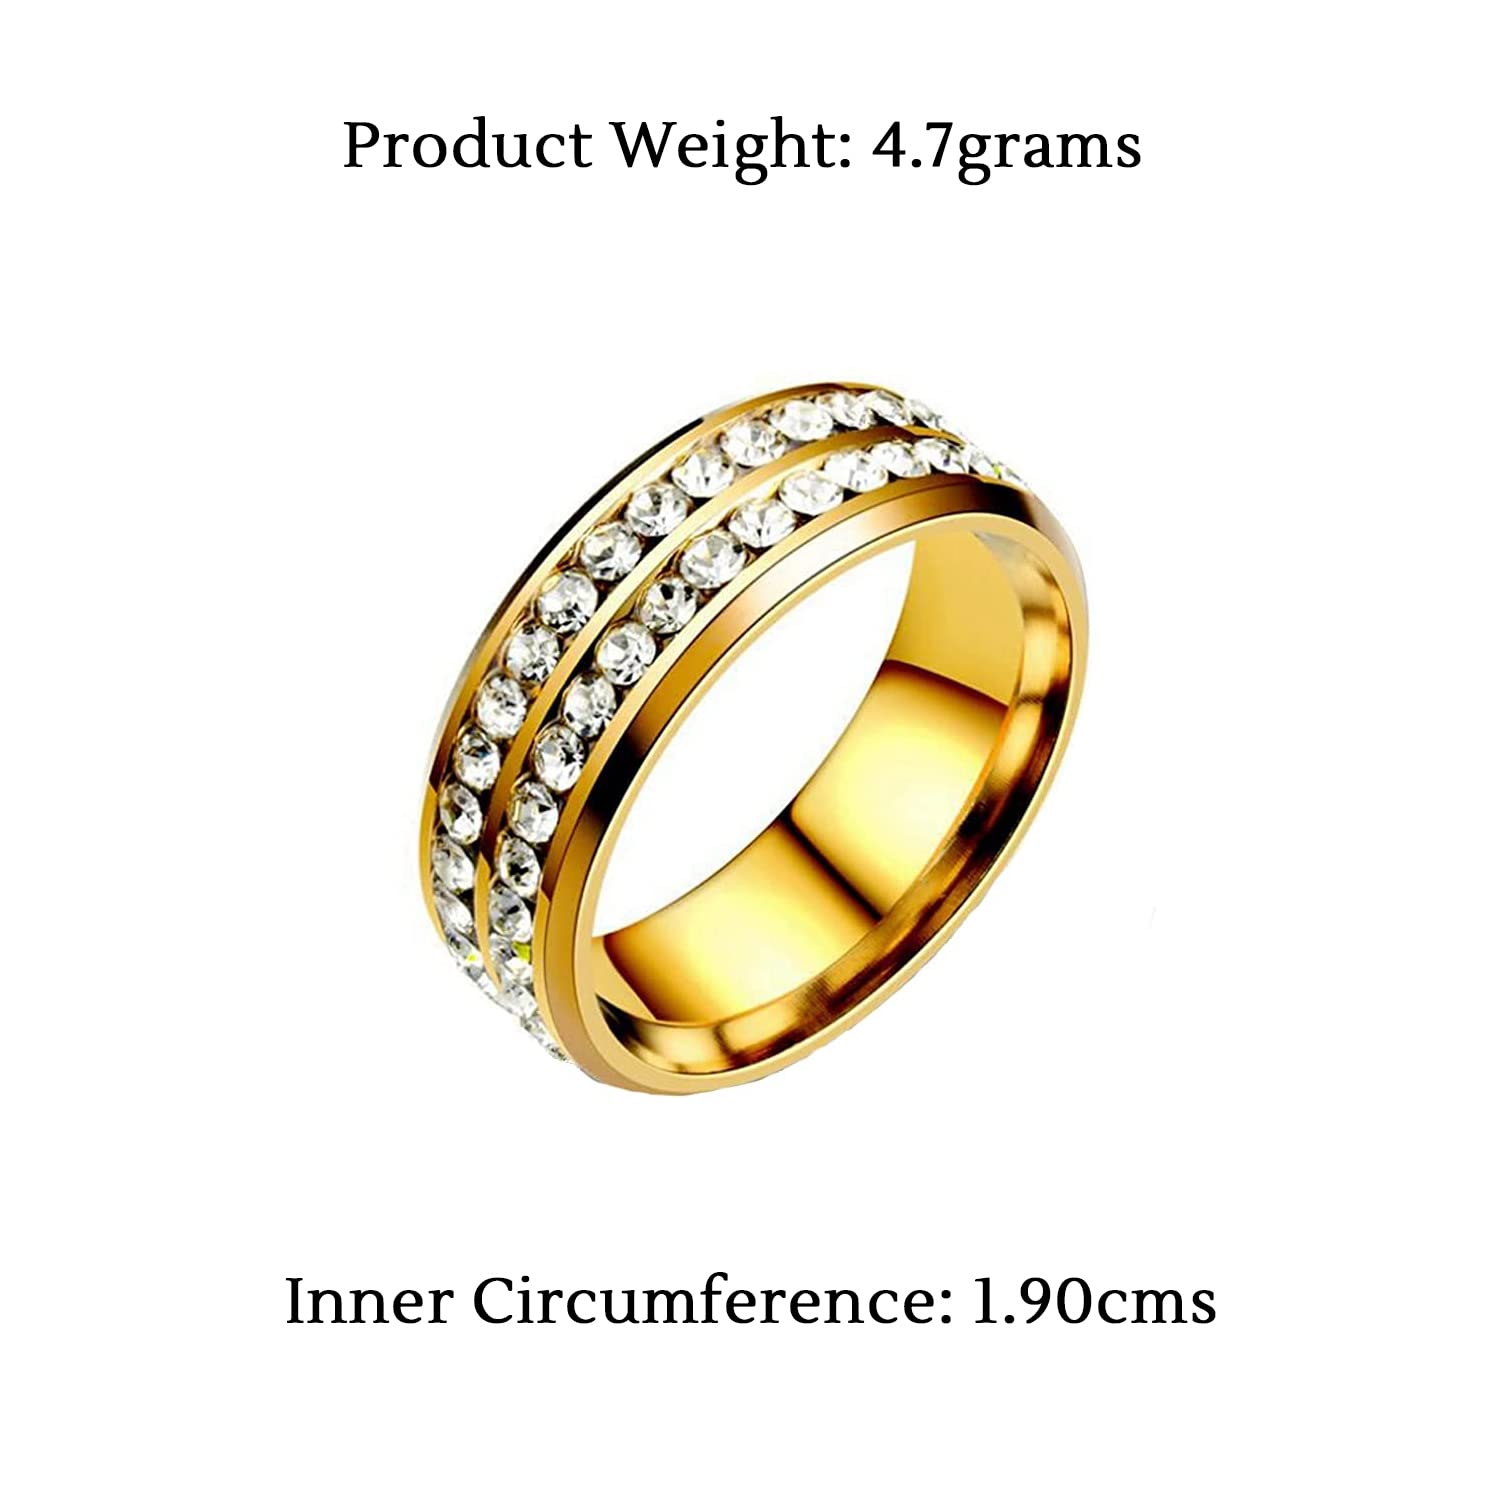 Buy BELLINA Black, Silver and Gold Tone Finger Ring For Boys And Men |  Exclusive and Trendy Titanium Ring For Boys And Men (Pack of 3) at Amazon.in